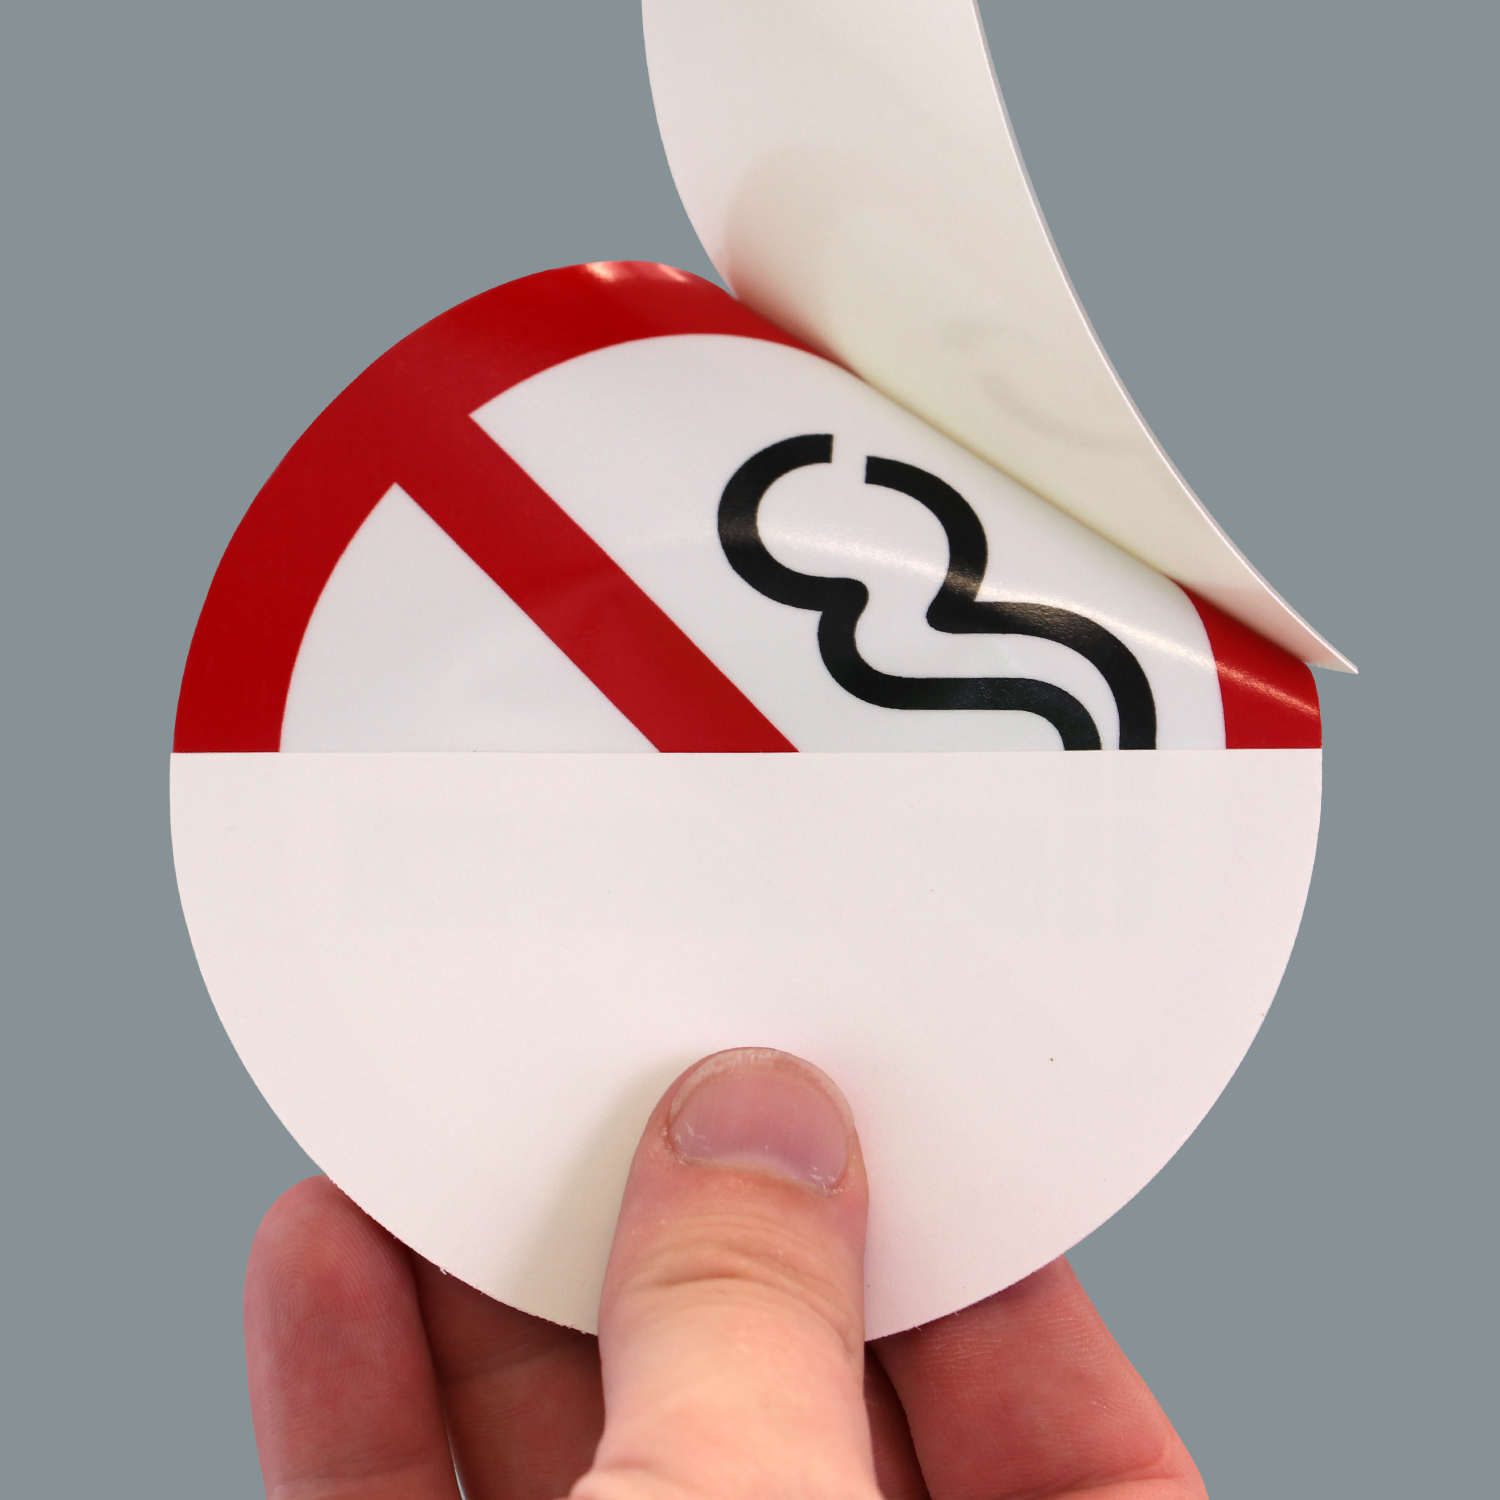 NO NON SMOKING 2-SIDED VINYL DECAL STICKER SIGN 5 1/2" X 5" 